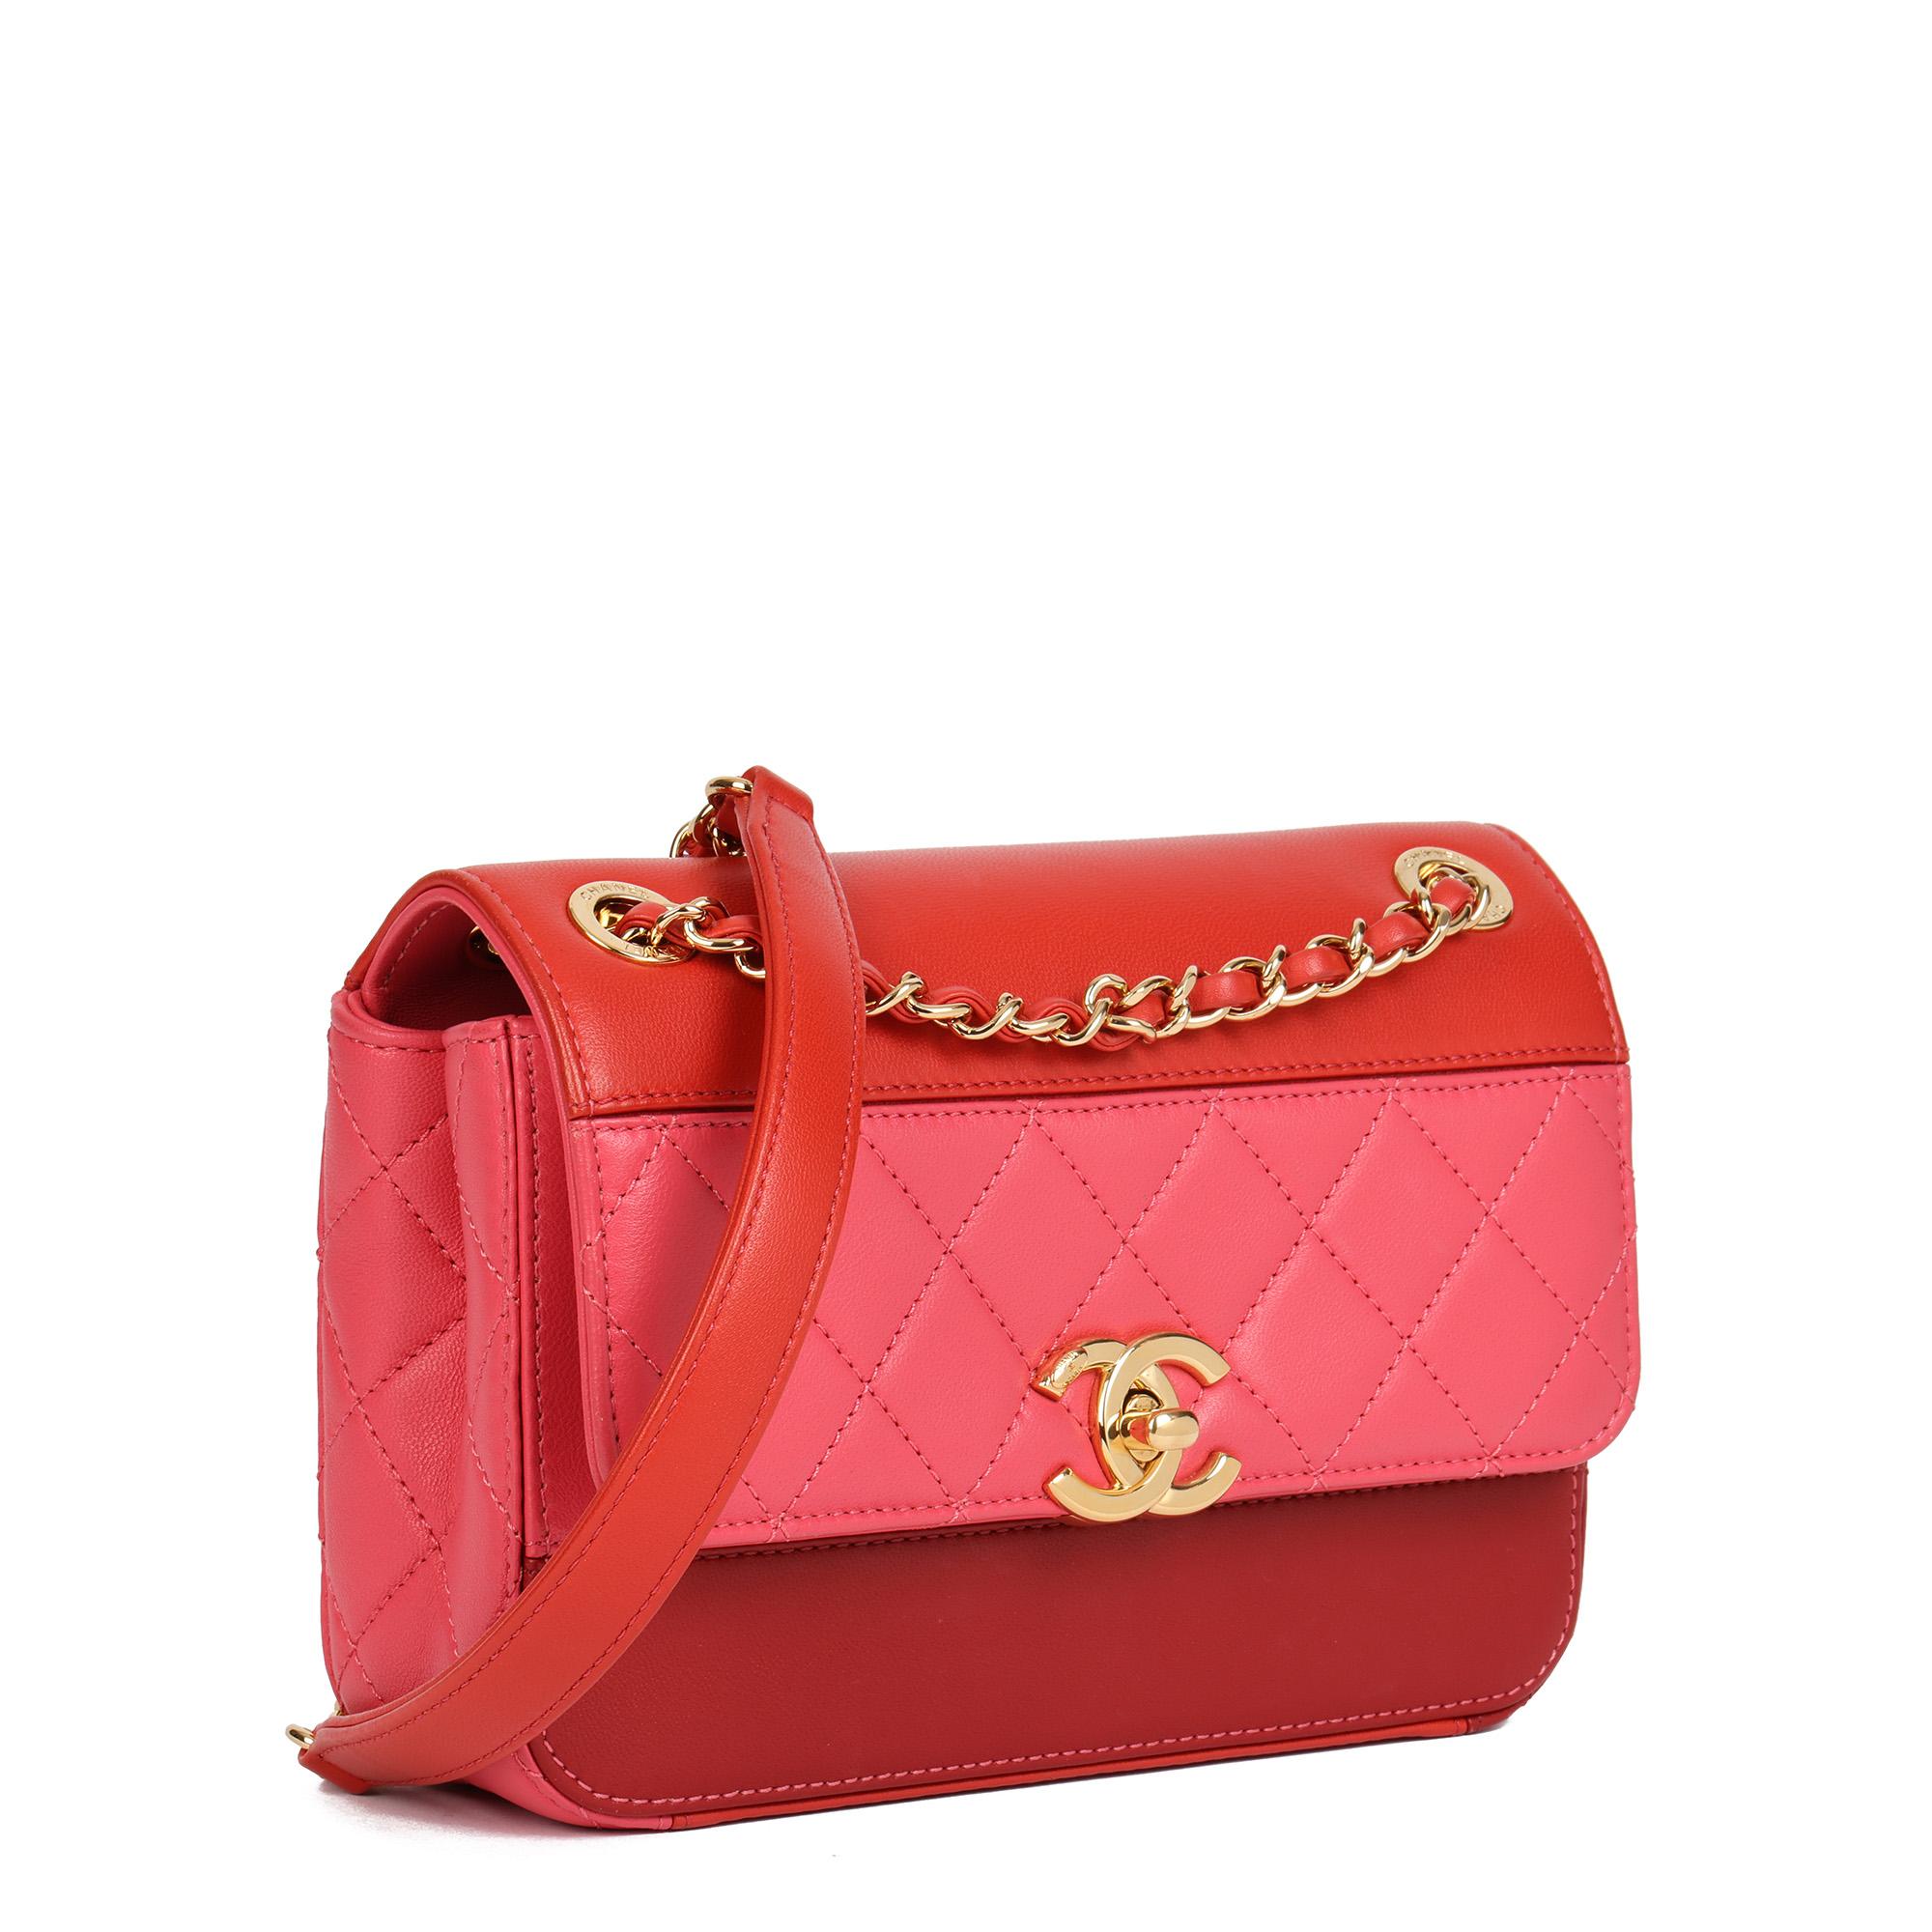 CHANEL
Red, Orange & Pink Quilted Lambskin Mini Classic Single Flap Bag

Serial Number: 28614889
Age (Circa): 2019
Accompanied By: Chanel Dust Bag, Authenticity Card
Authenticity Details: Authenticity Card, Serial Sticker (Made in Italy)
Gender: